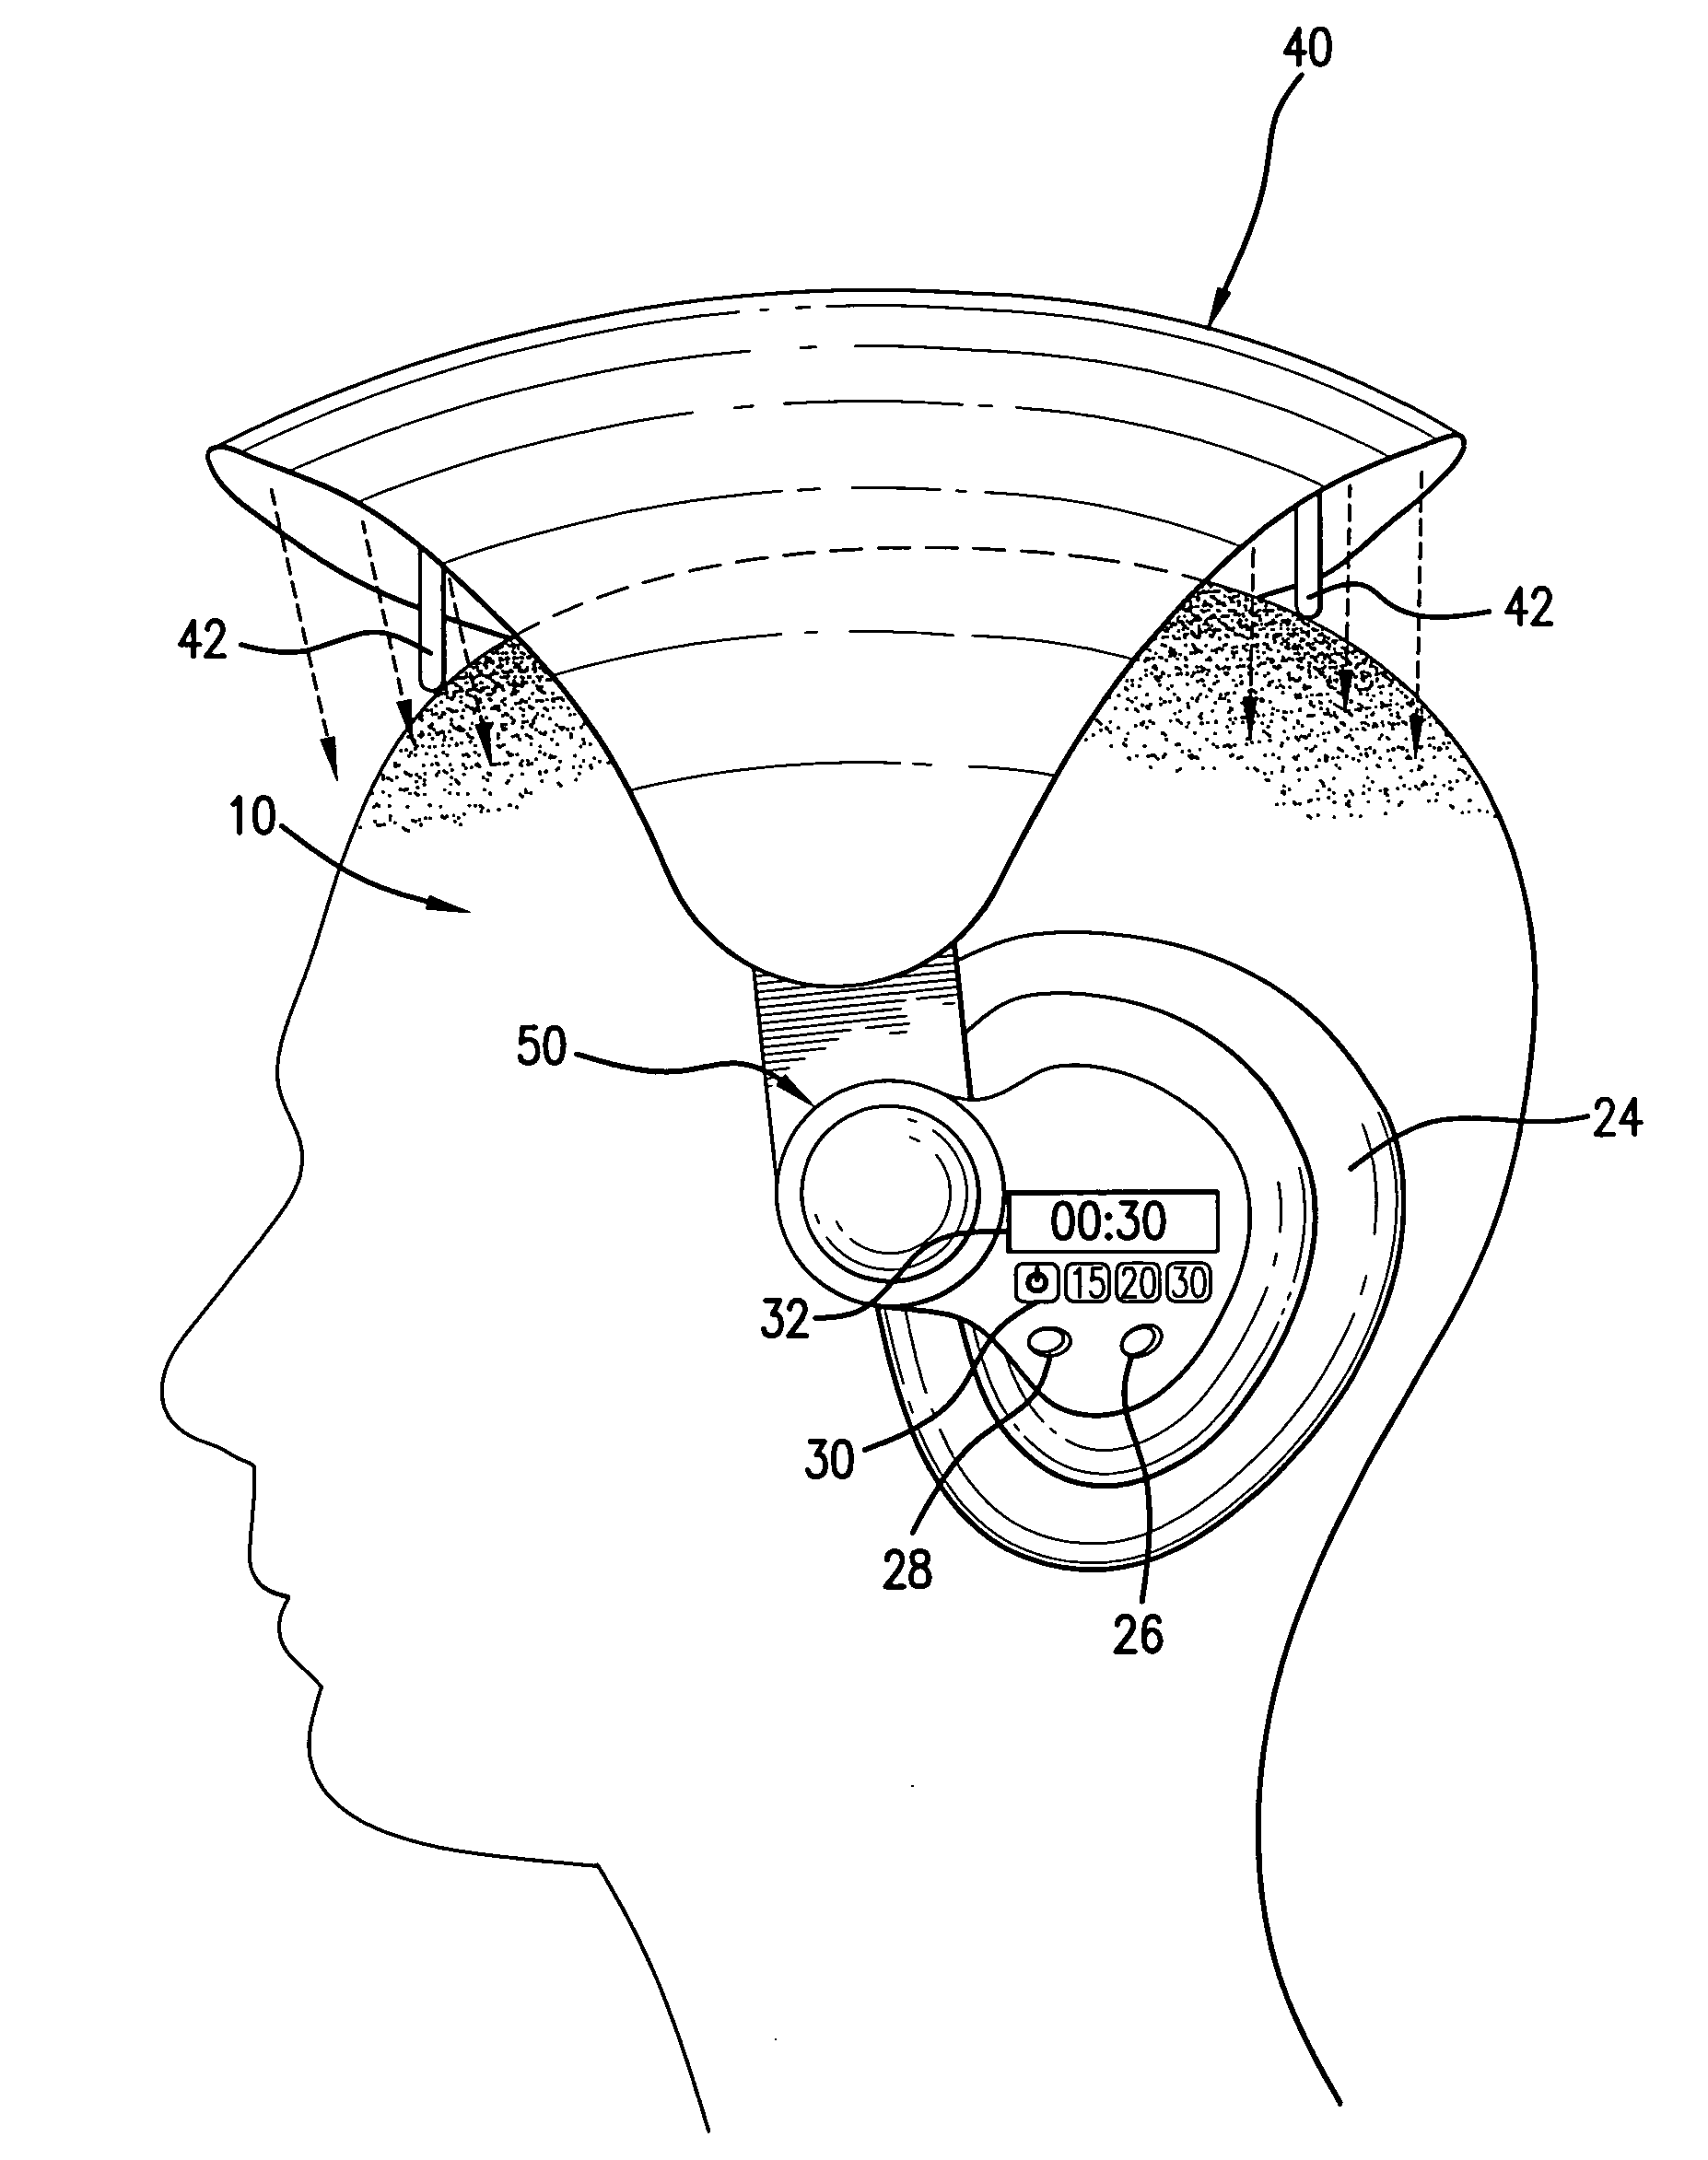 Phototherapy apparatus for hair, scalp and skin treatment